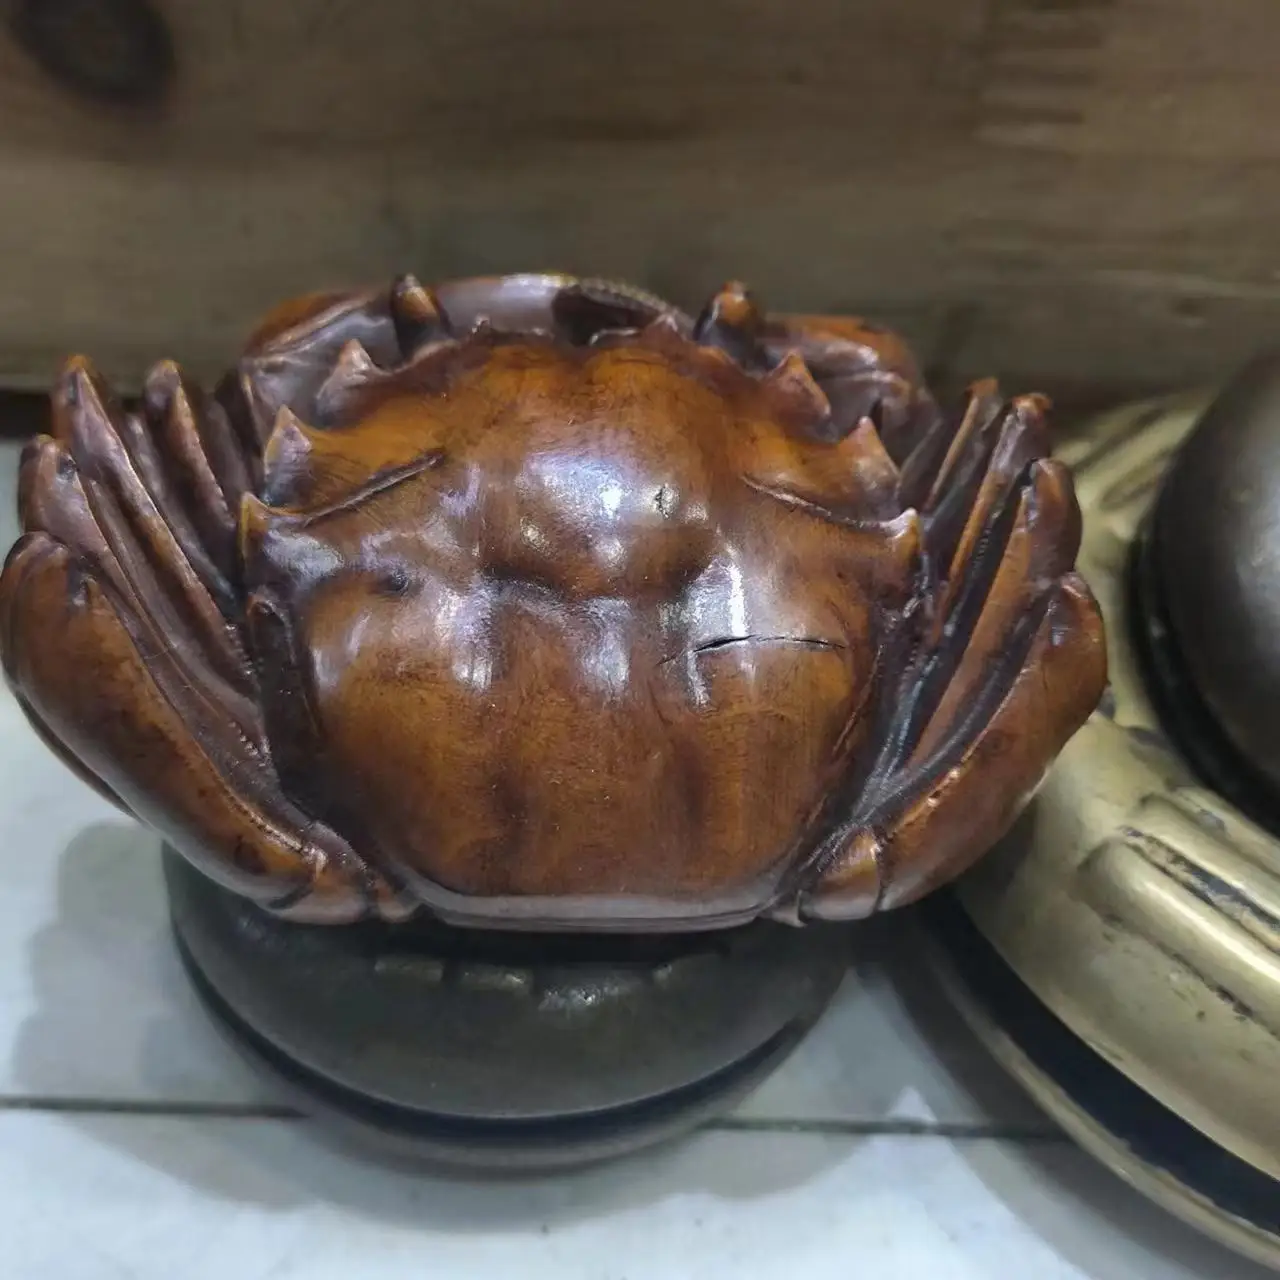 1pcs/lot boxwood carved crab ornament Good meaning Solid wood handicraft Tea pets Collectible Superb craftsmanship Animal shape